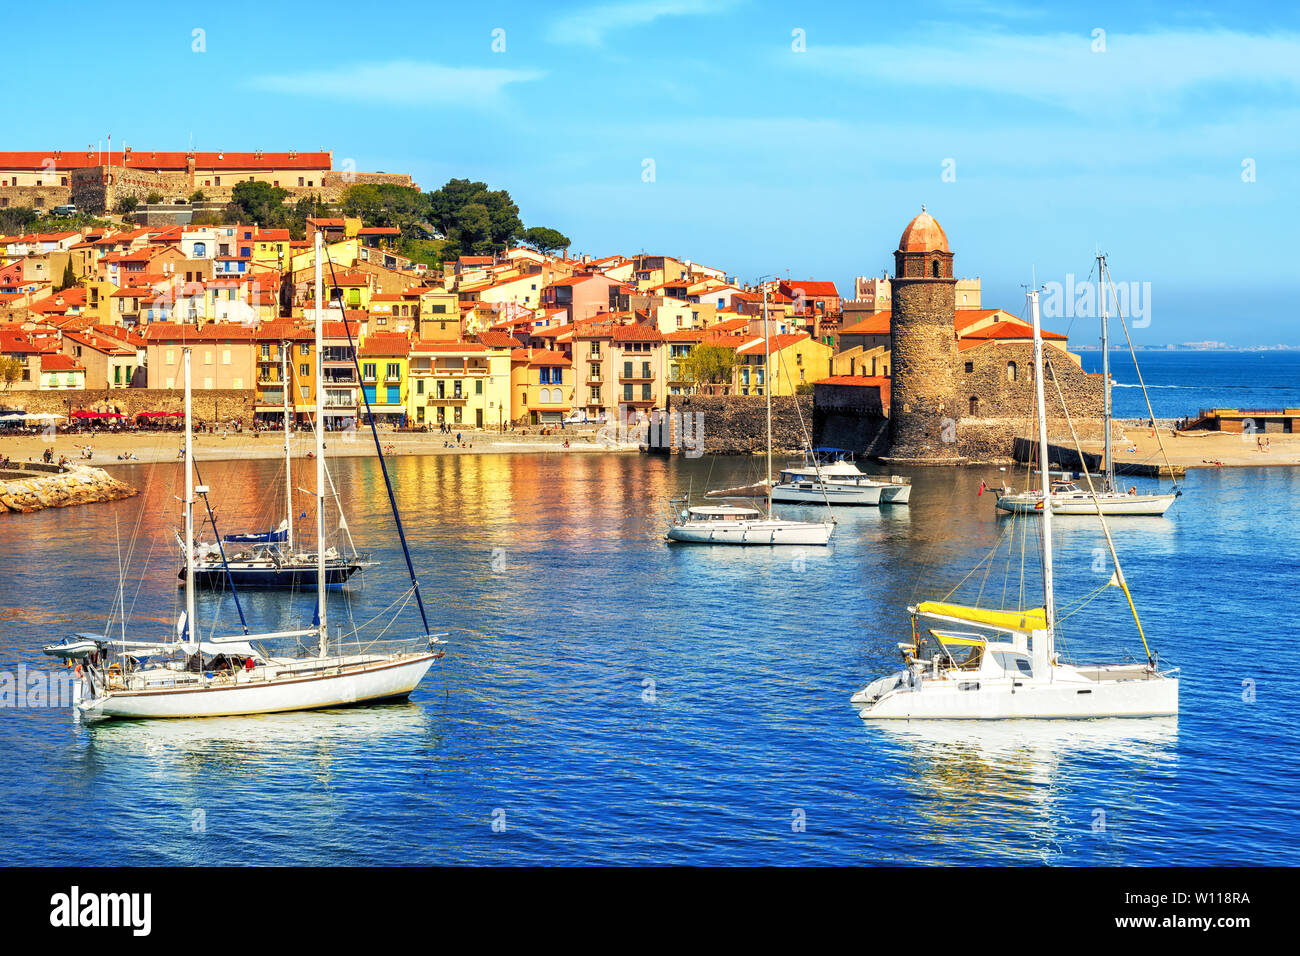 Collioure, France, a popular resort town on Mediterranean sea, view of the Old town with Notre-Dame des Anges church and the harbor Stock Photo